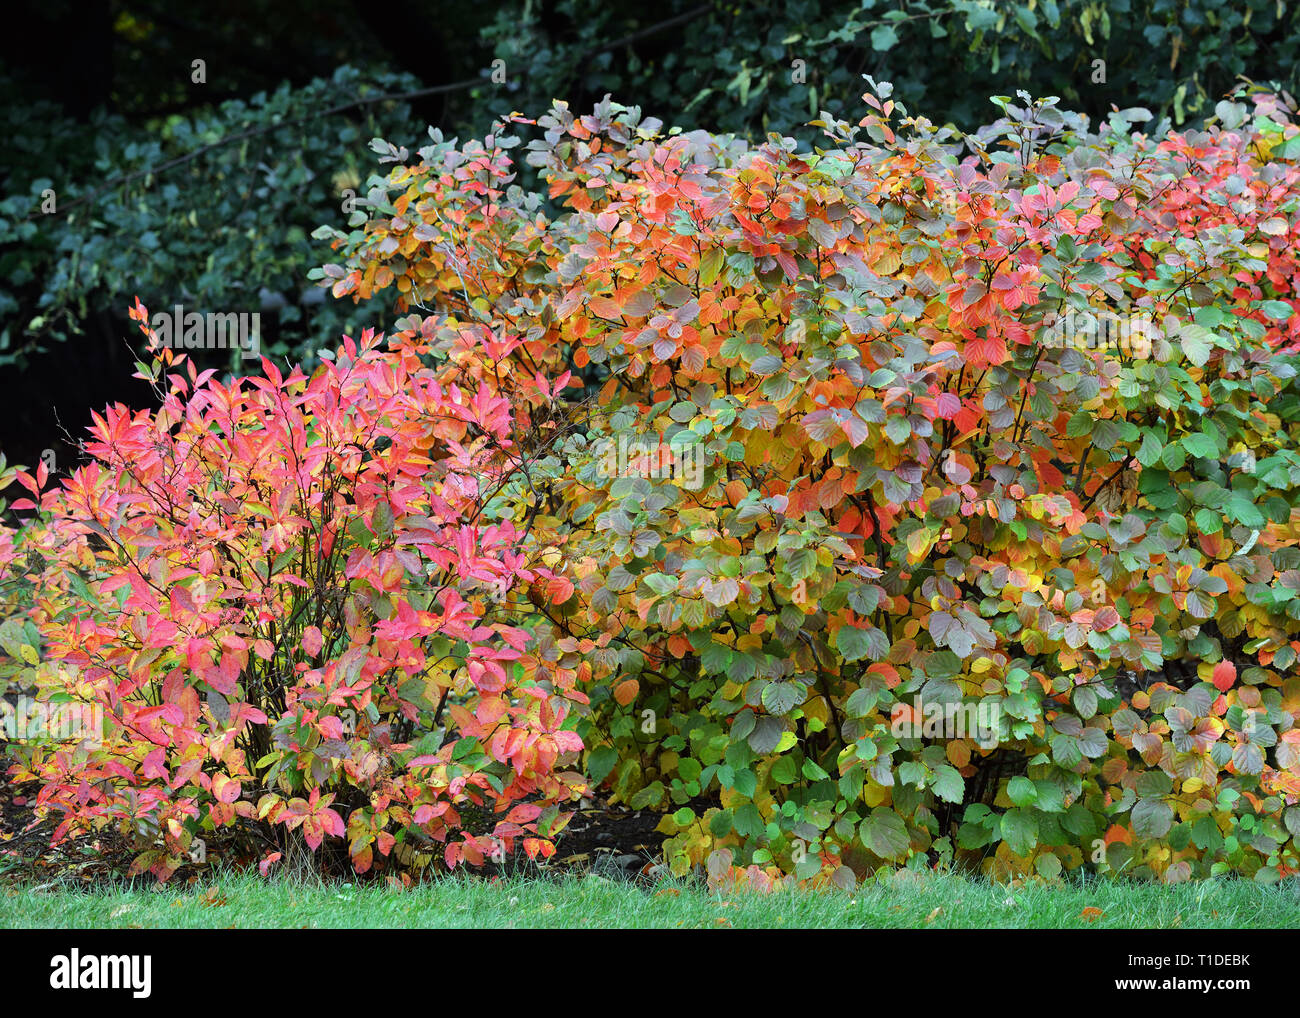 Fothergilla Mount Airy in garden hedge. Fall foliage shows quite colorful and unique shades of yellow, orange and red purple leaves. Stock Photo